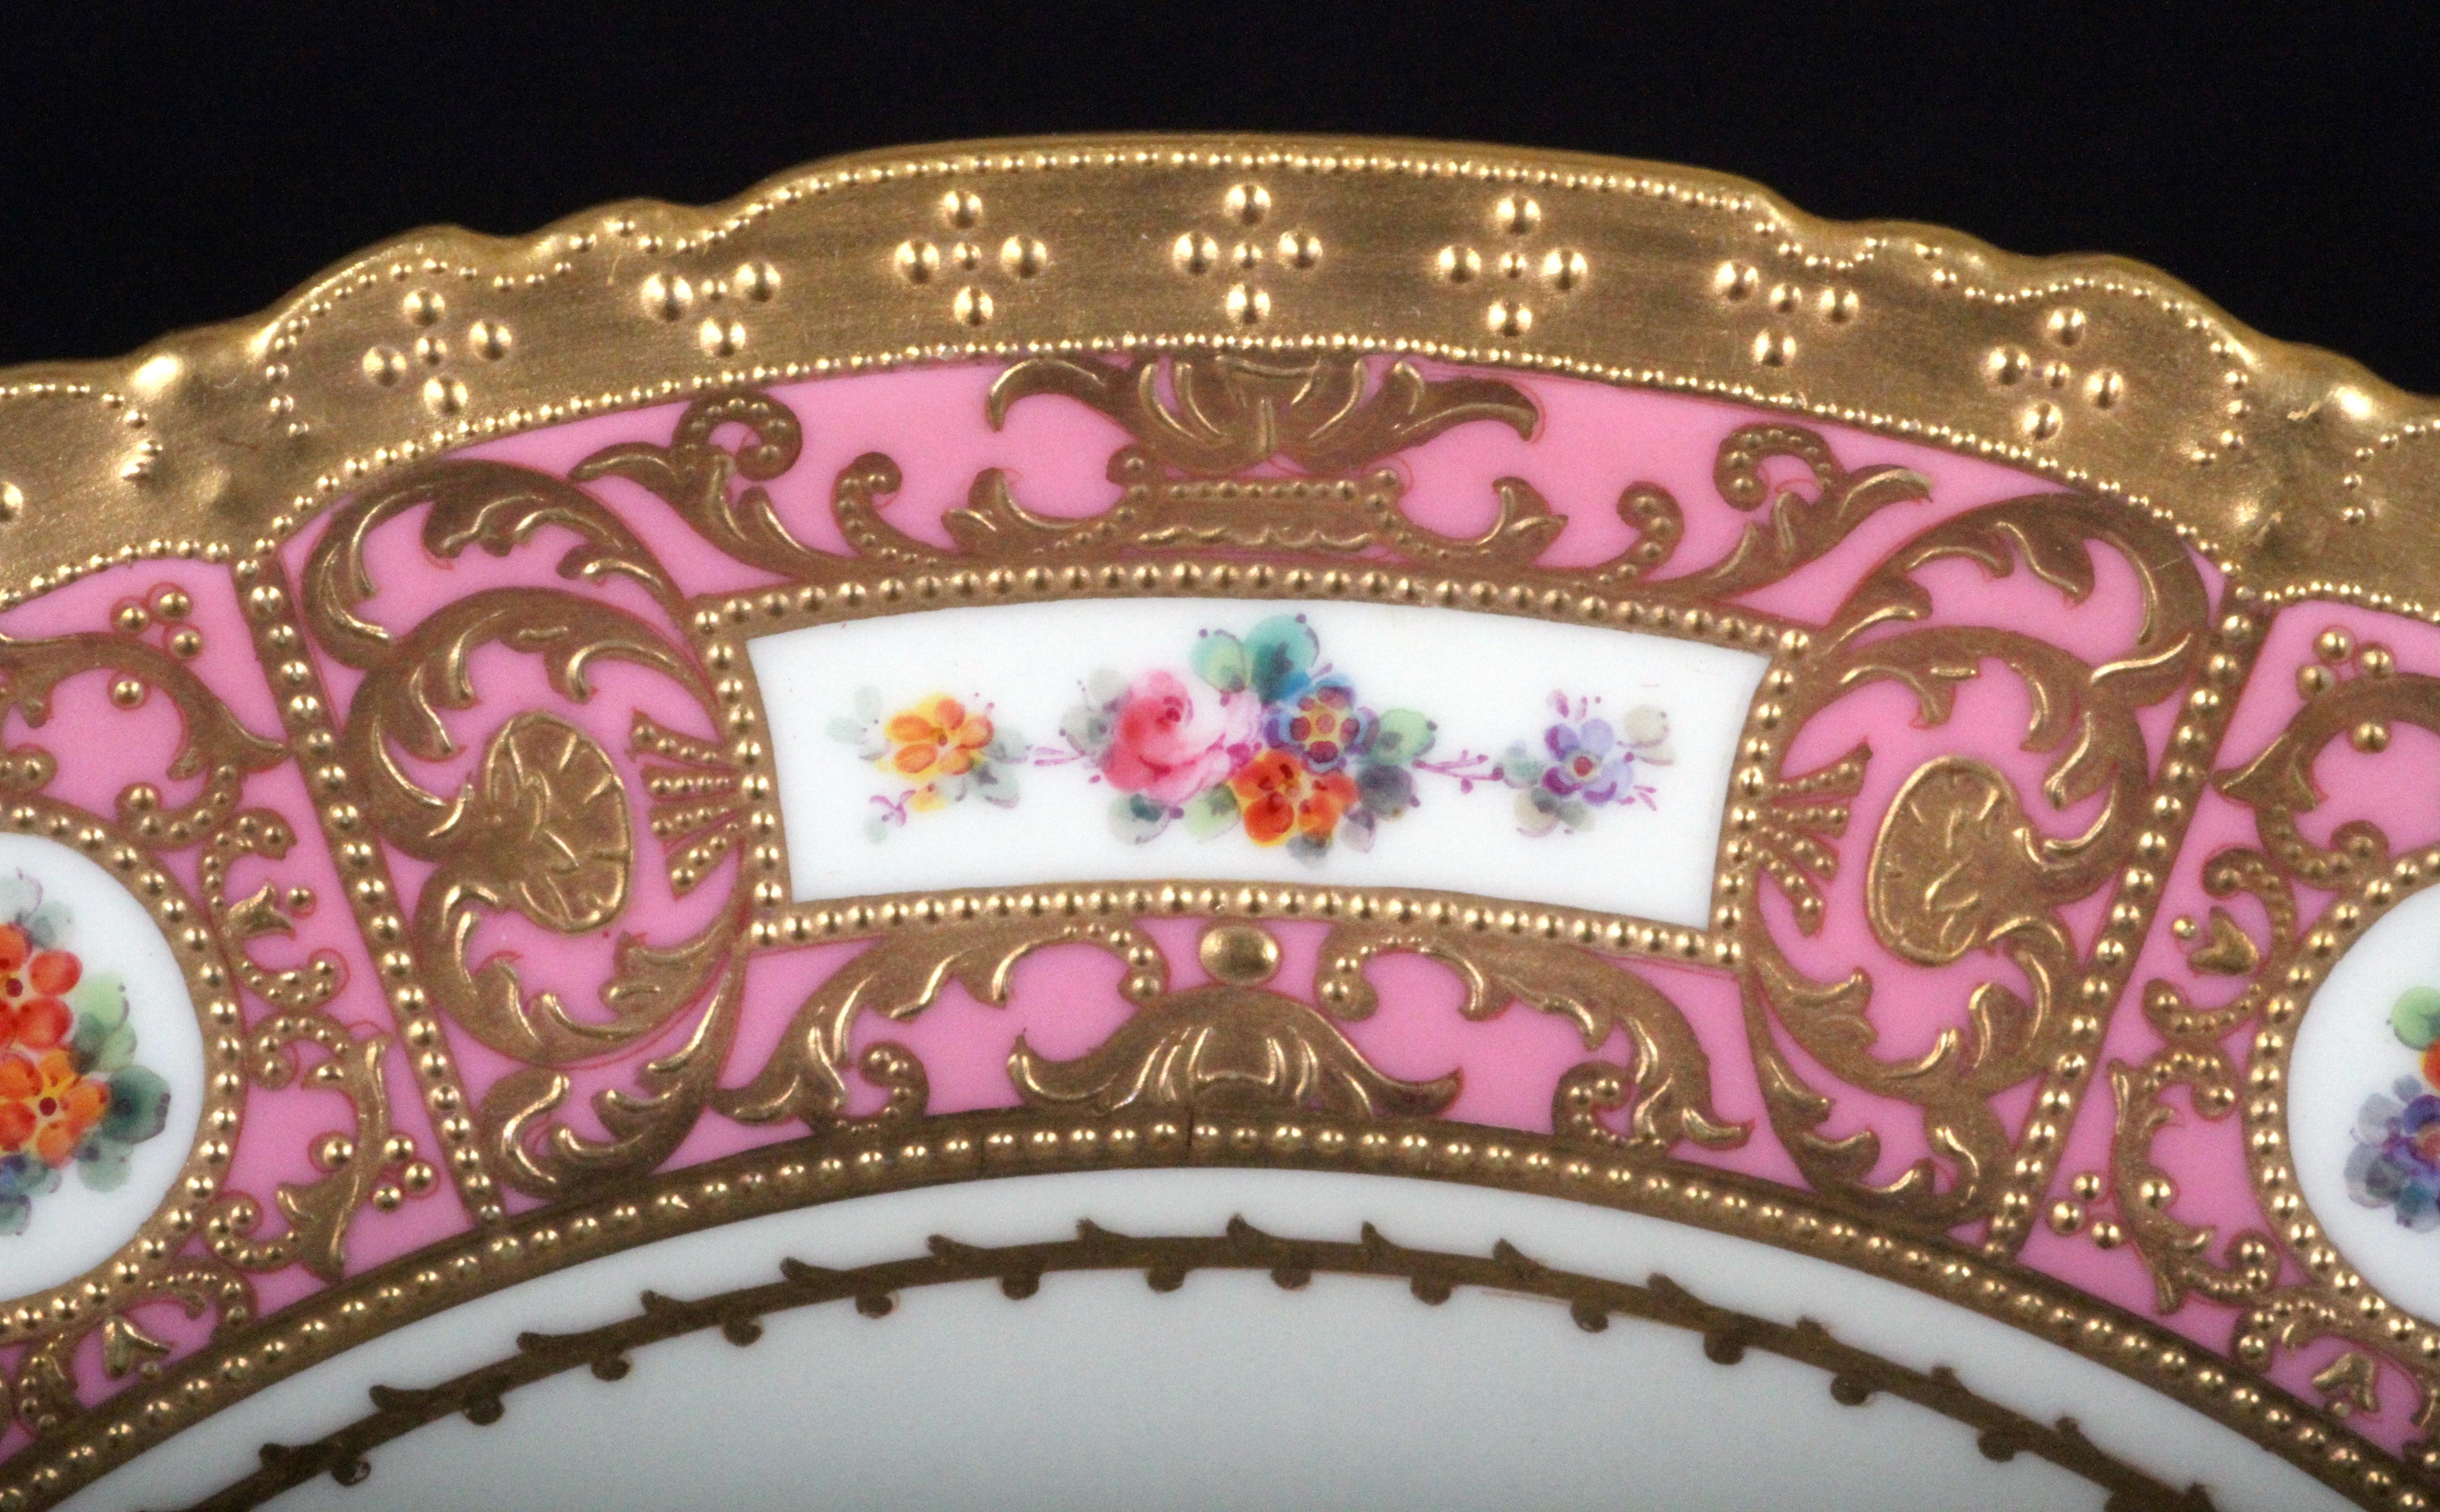 11 Derby for Tiffany Hand Painted and Gilded Pink Service Plates im Zustand „Hervorragend“ im Angebot in New York, NY